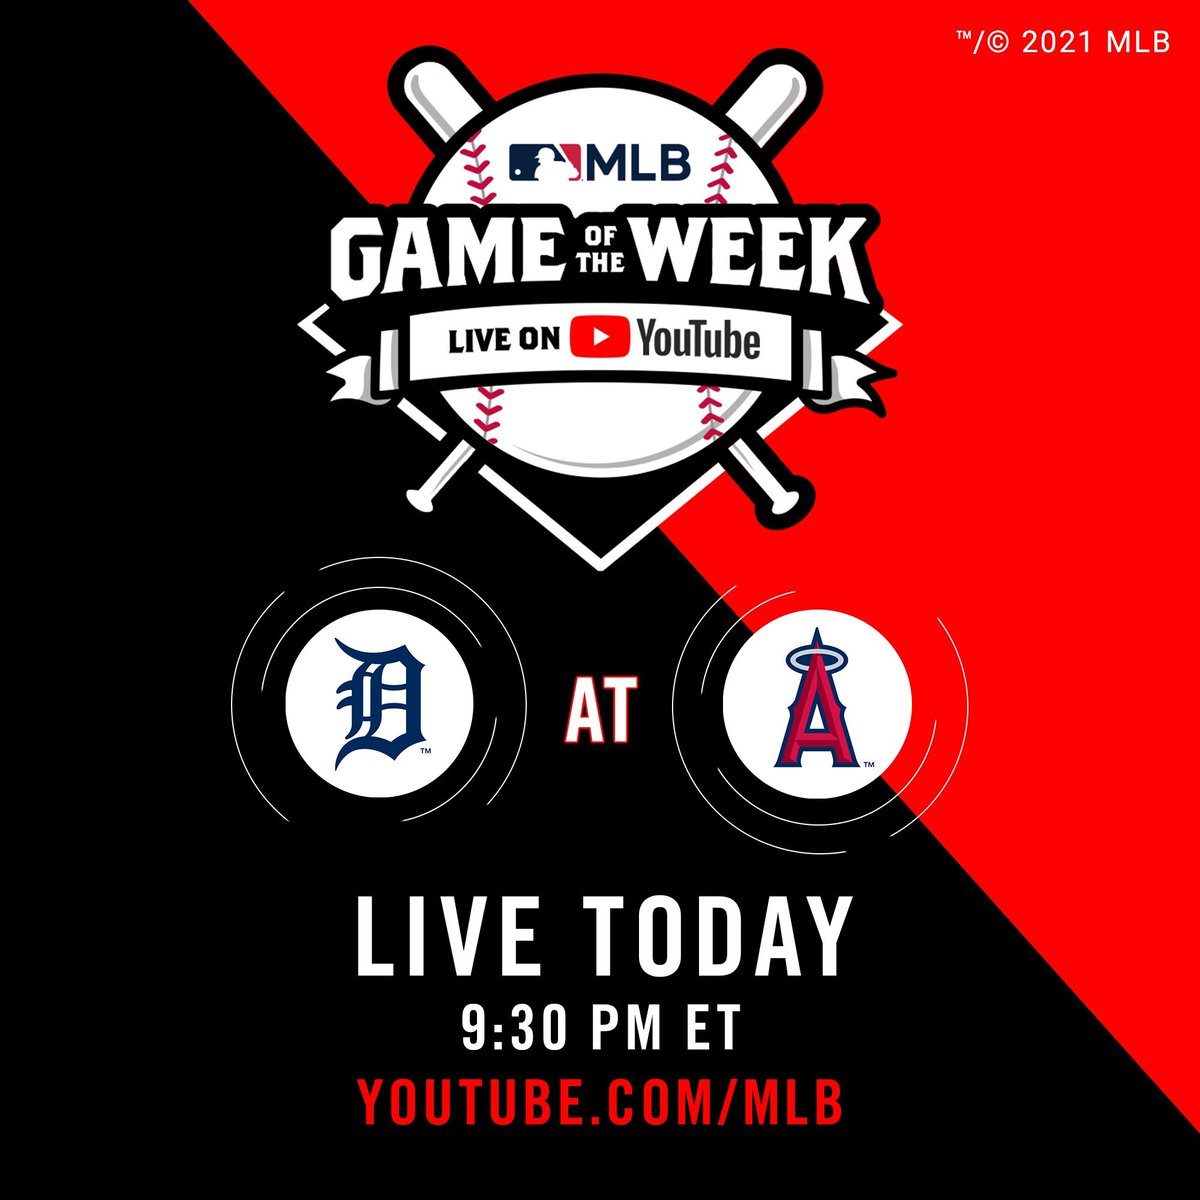 #Ad We’re joining the live chat for the MLB Game of the Week on @YouTube today for Tigers vs Angels along with other creators and industry experts! Follow along for our live commentary and insights at yt.be/TigersAtAngels